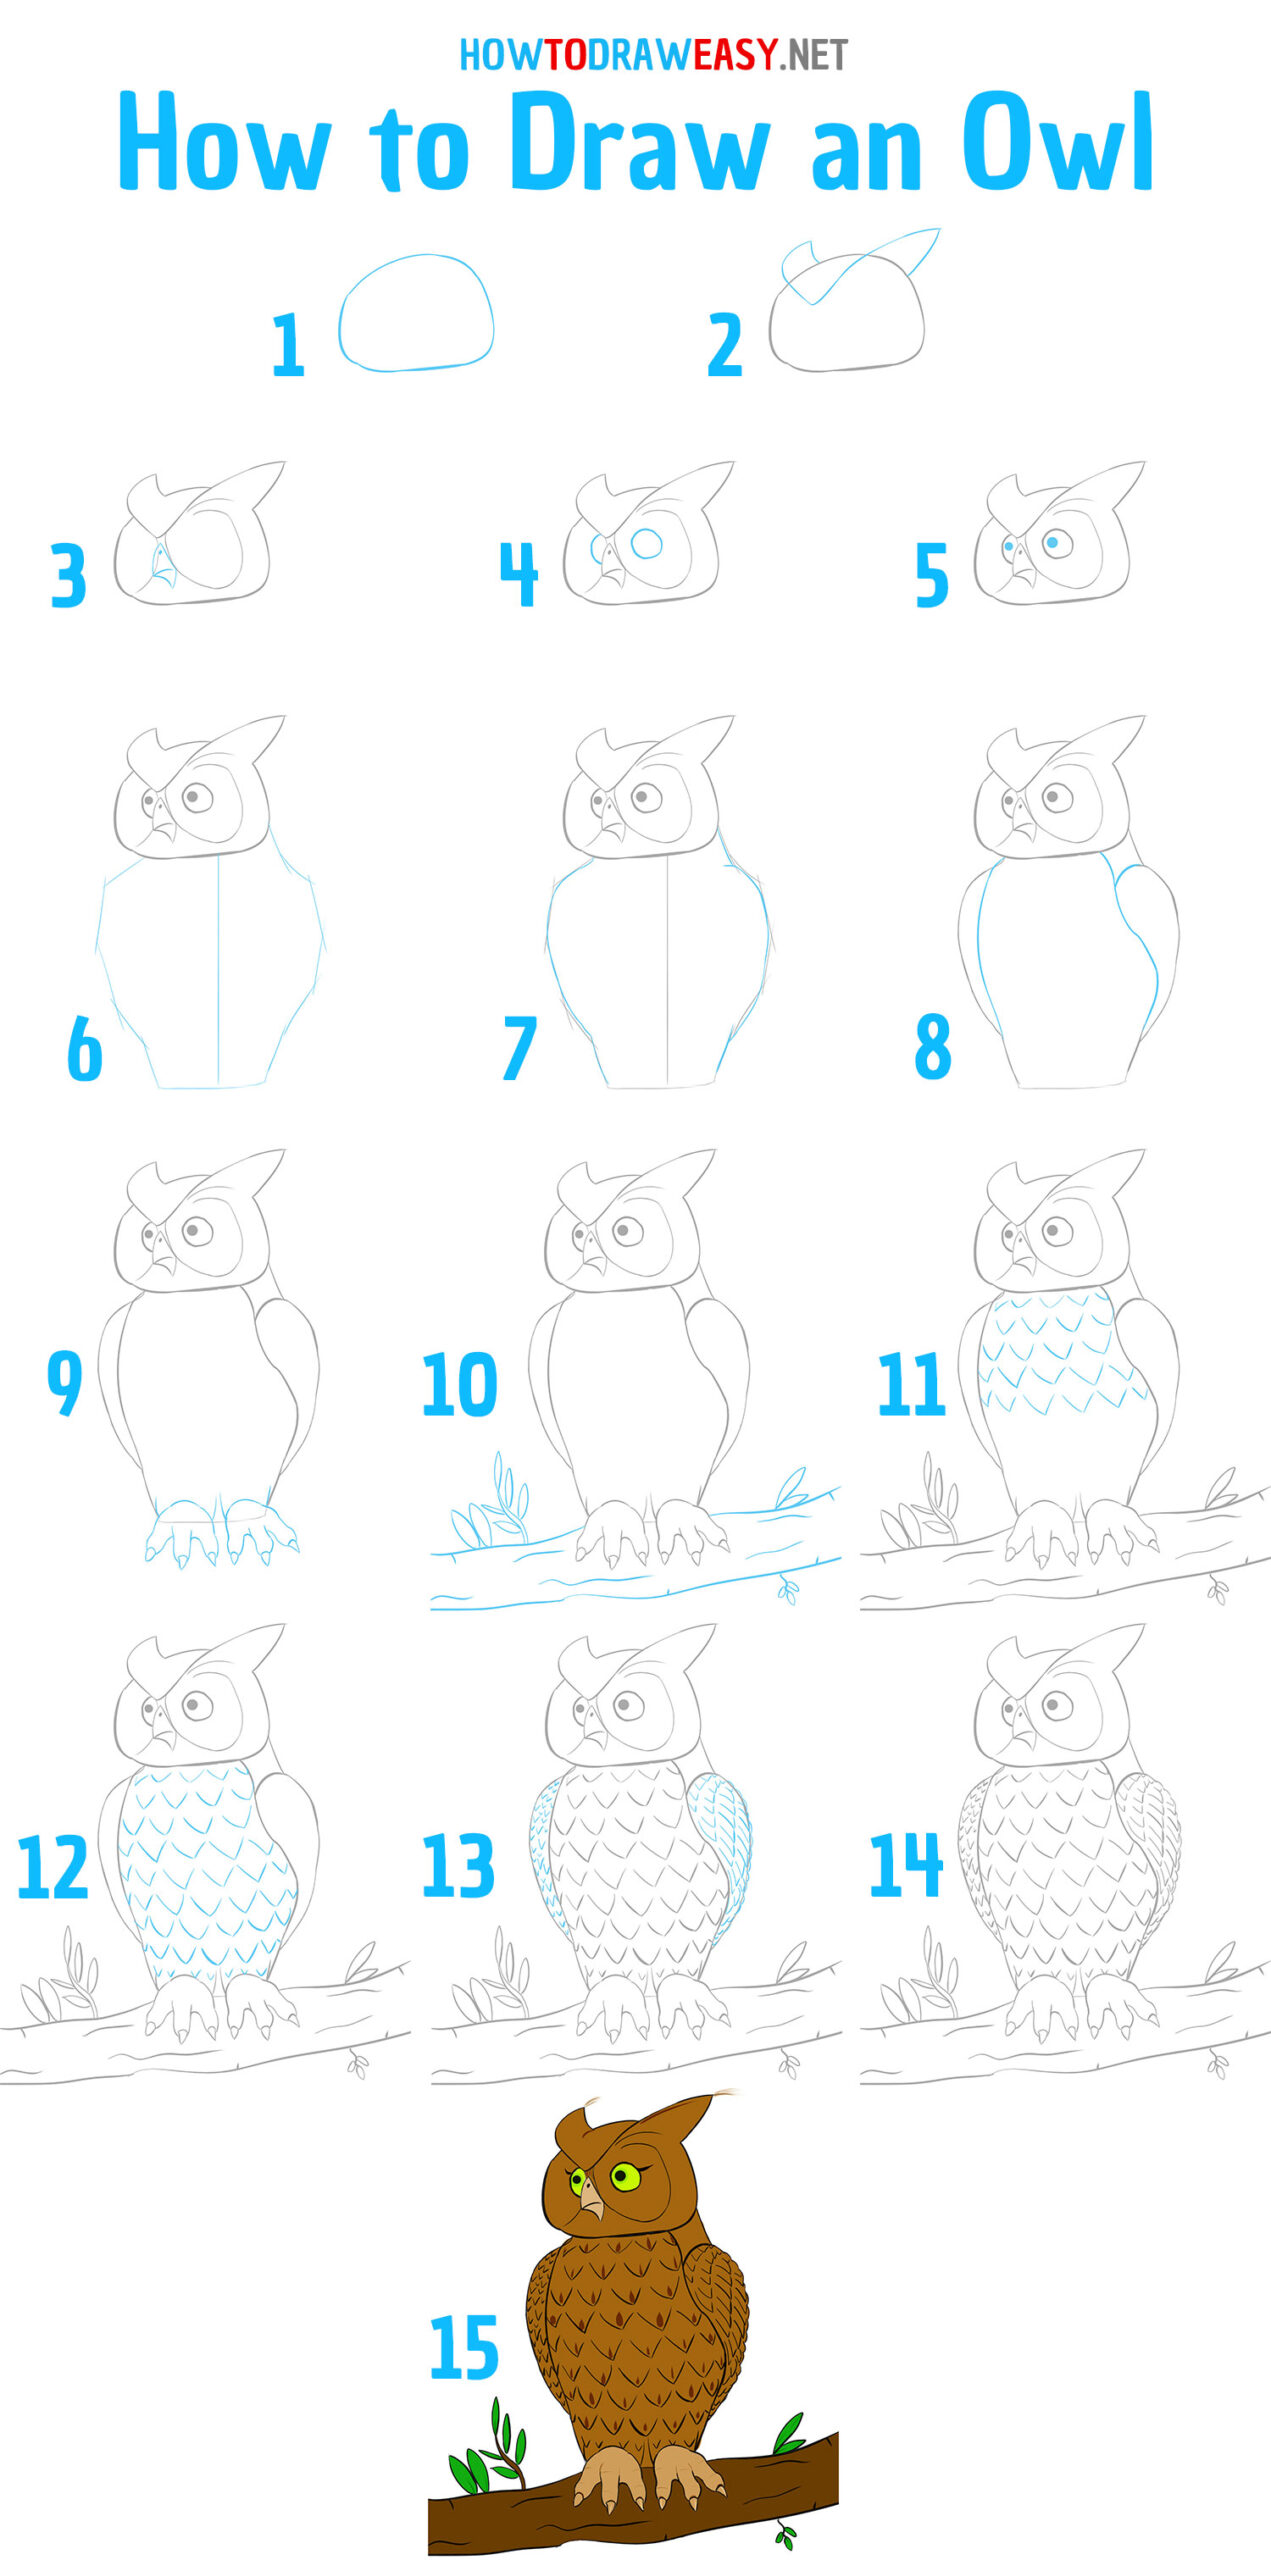 How to Draw an Owl Step by Step